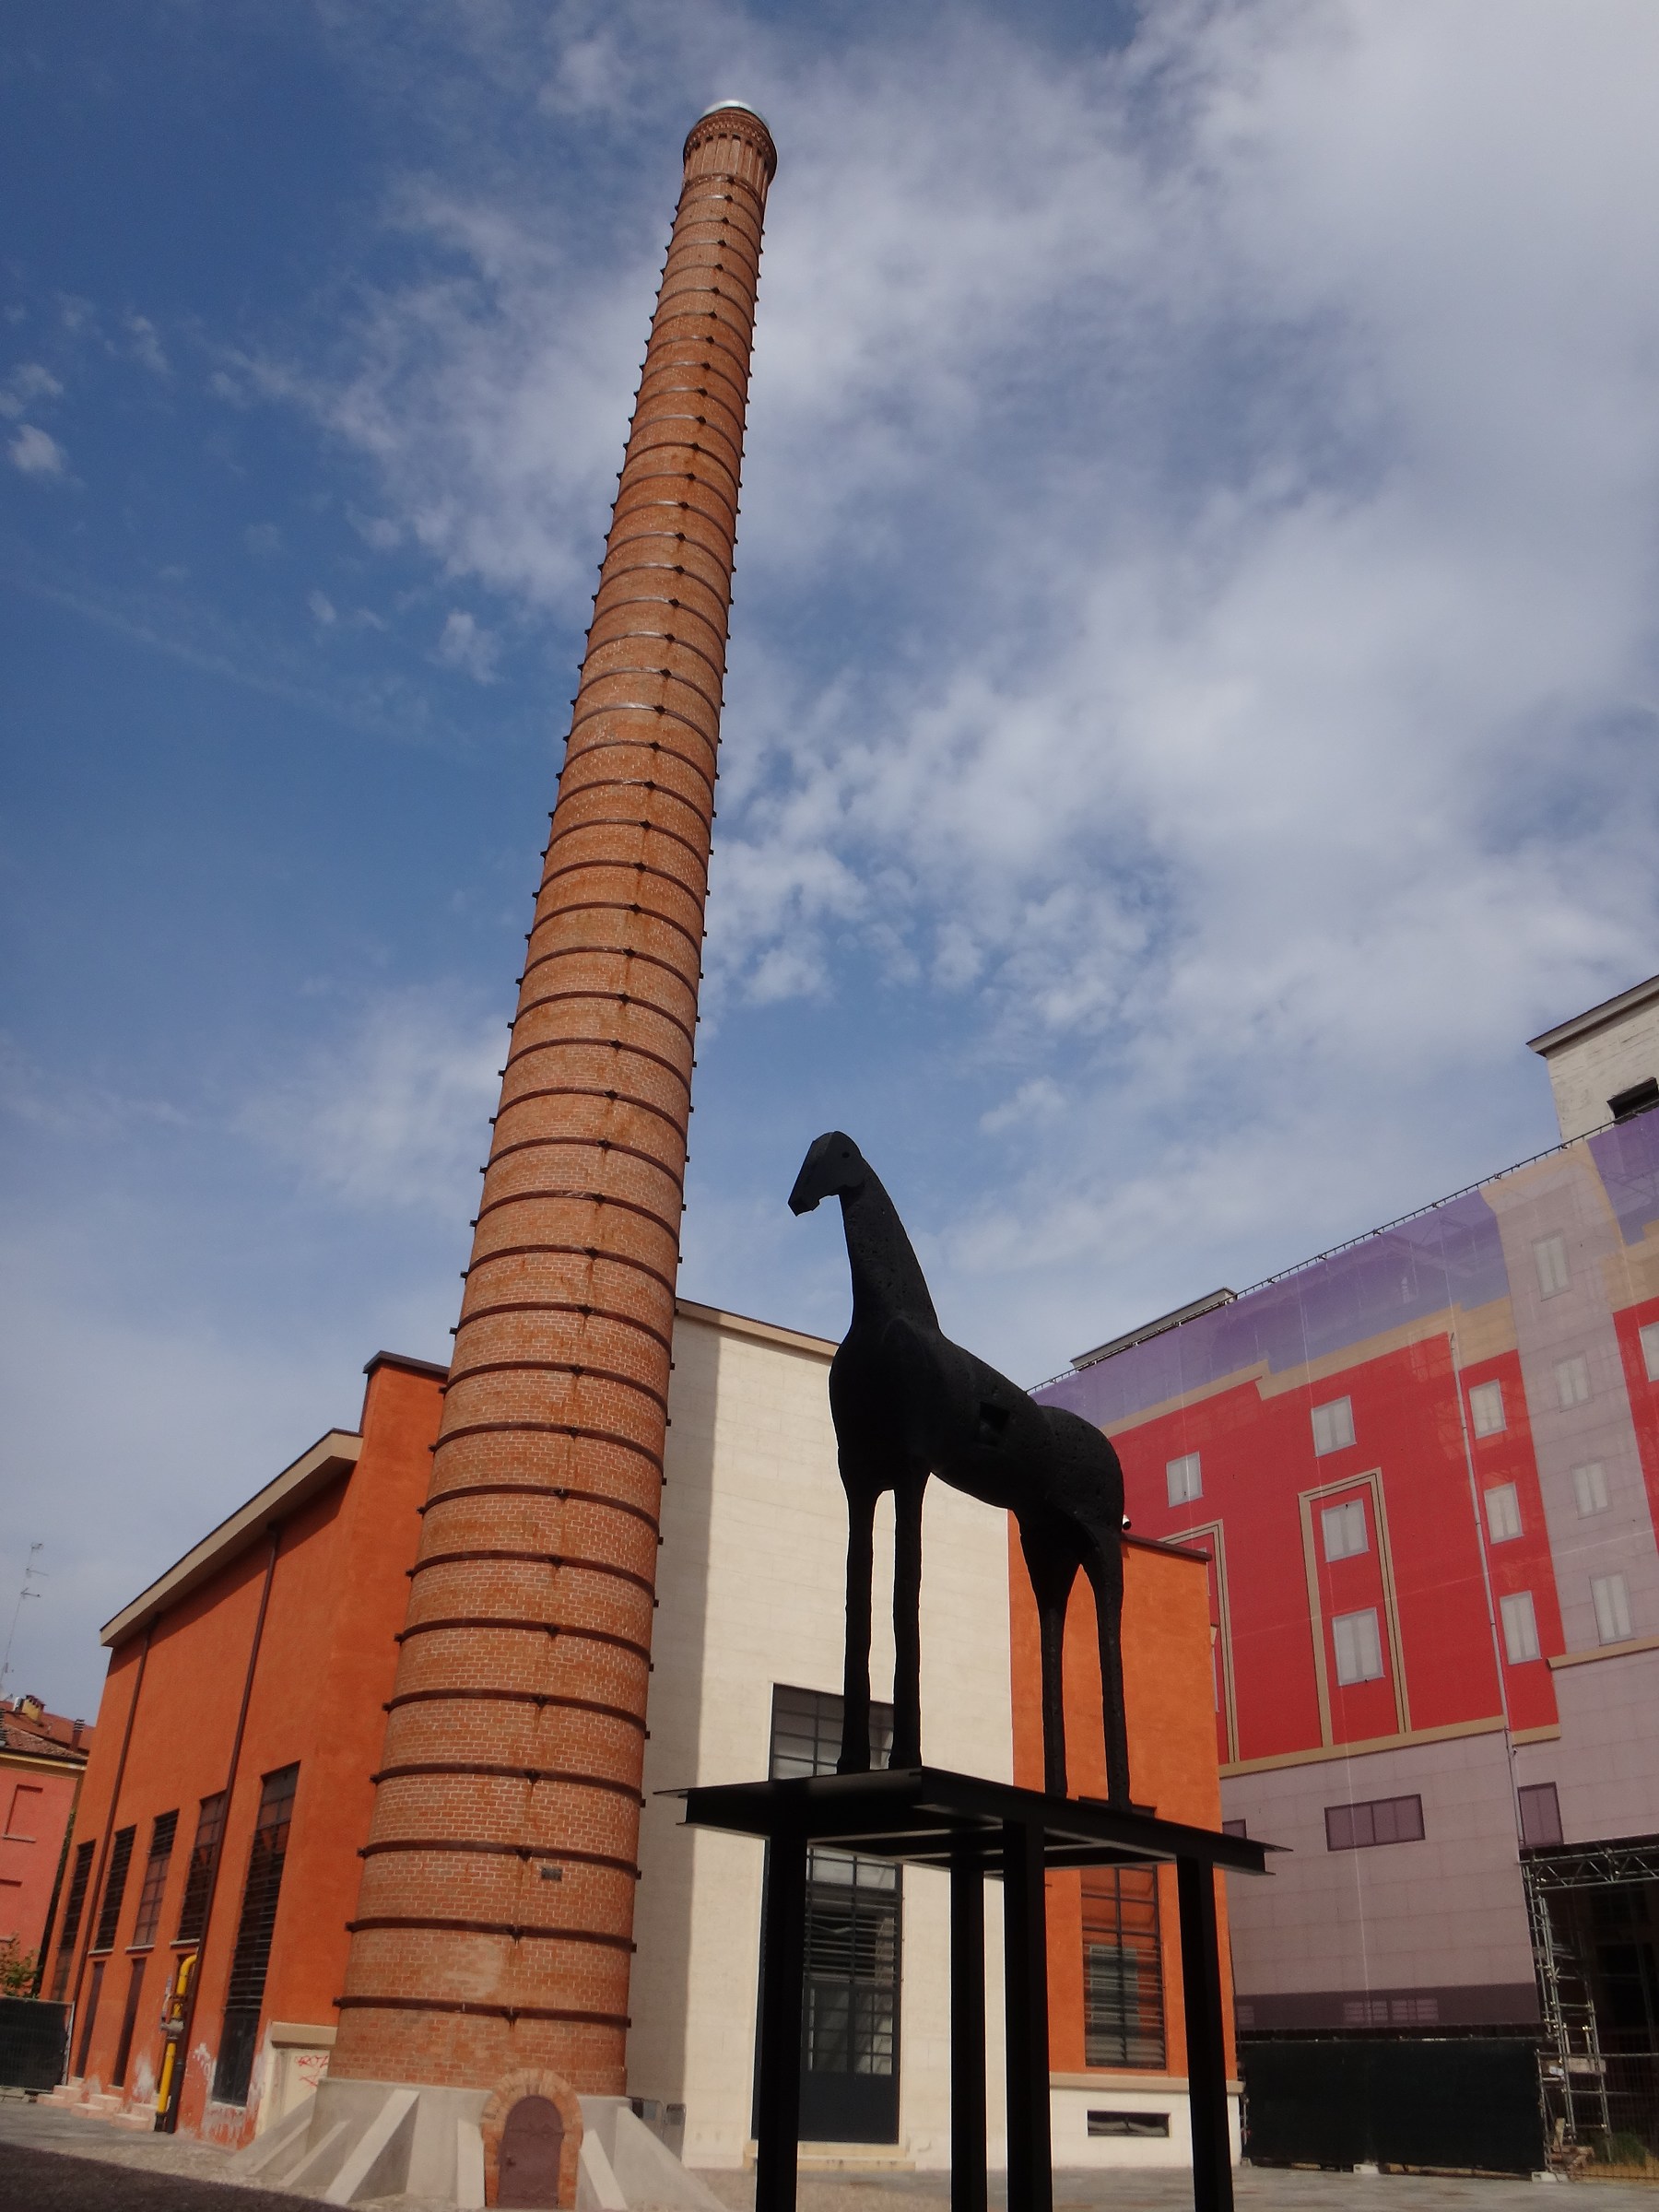 Art and history at the former Tobacco Factory...